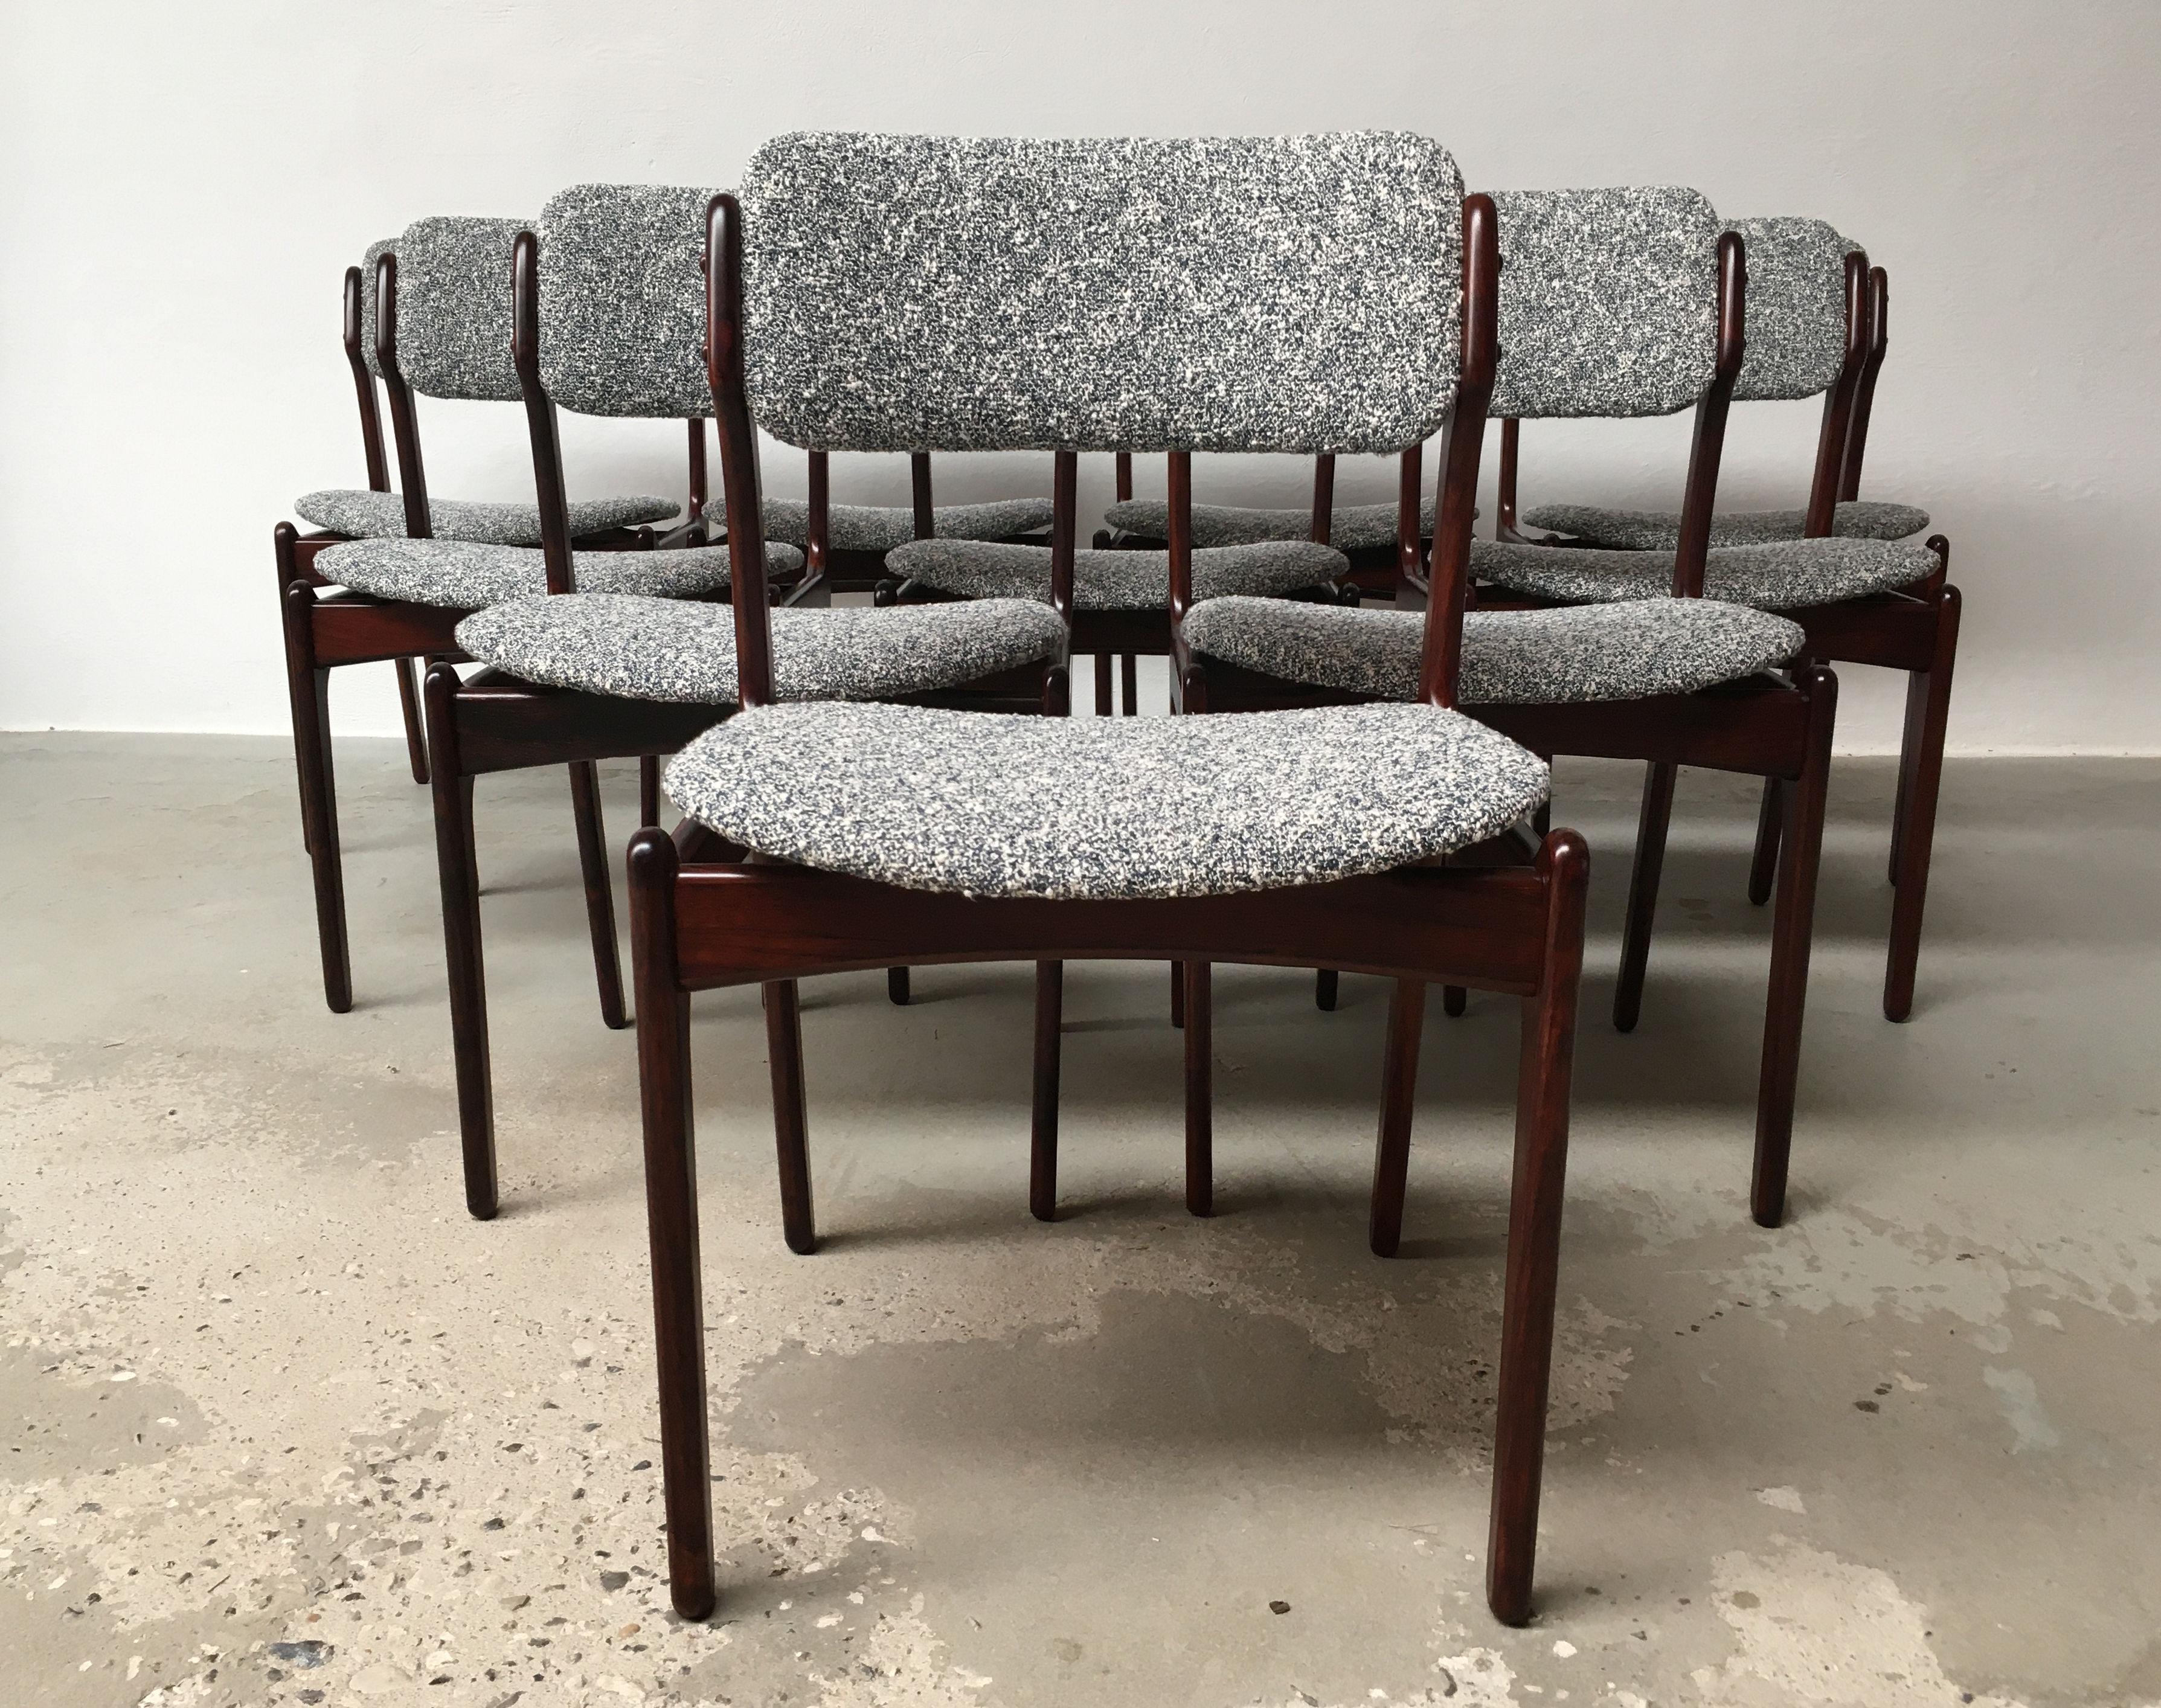 Set of ten fully restored and refinished dining chairs in rosewood with floating seats designed by Erik Buch for Oddense Maskinsnedkeri

The chairs have a simple appealing and sturdy construction and design that is becoming increasingly